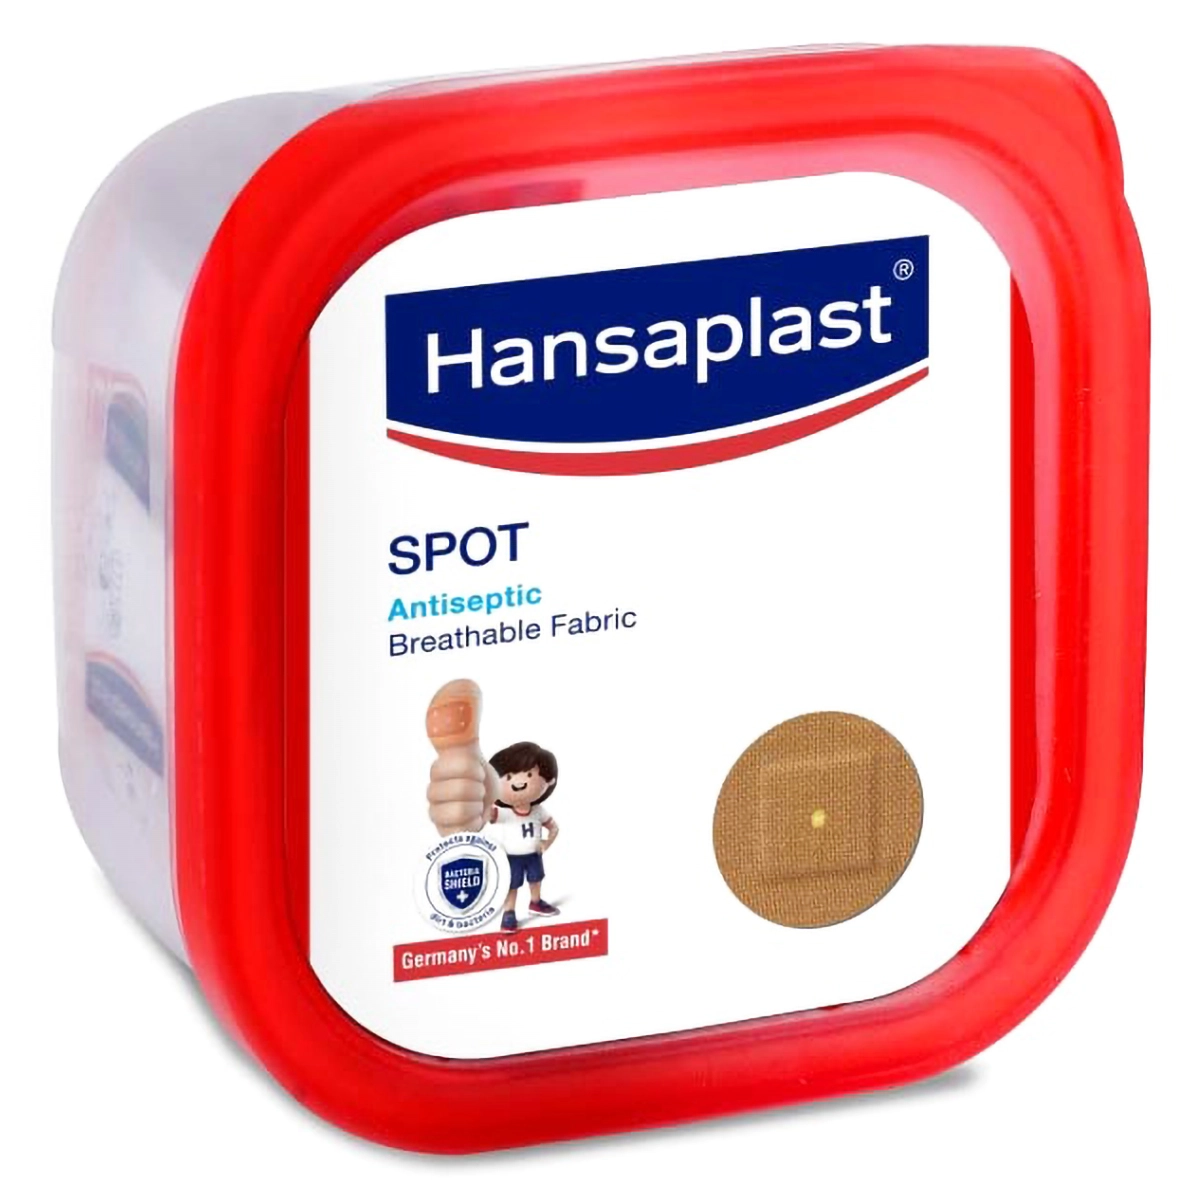 HANSAPLAST WATER RESIST 100S  Caring Pharmacy Official Online Store